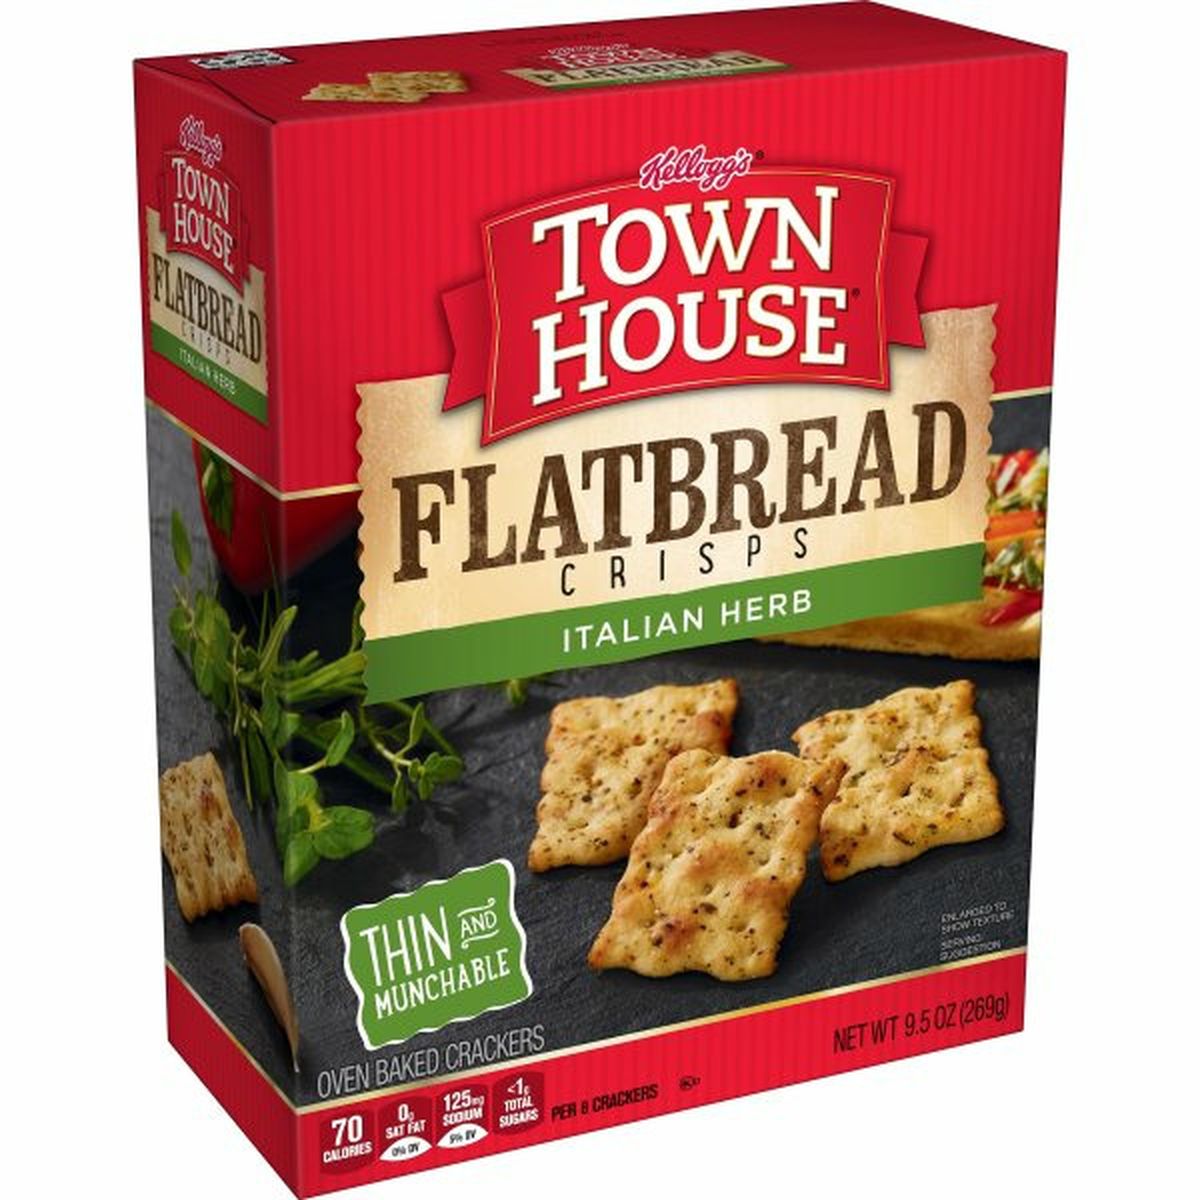 Calories in Kellogg's Town House Crackers Kellogg's Town House Flatbread Crisps Crackers, Italian Herb, Ready To Dip Snacks, 9.5oz